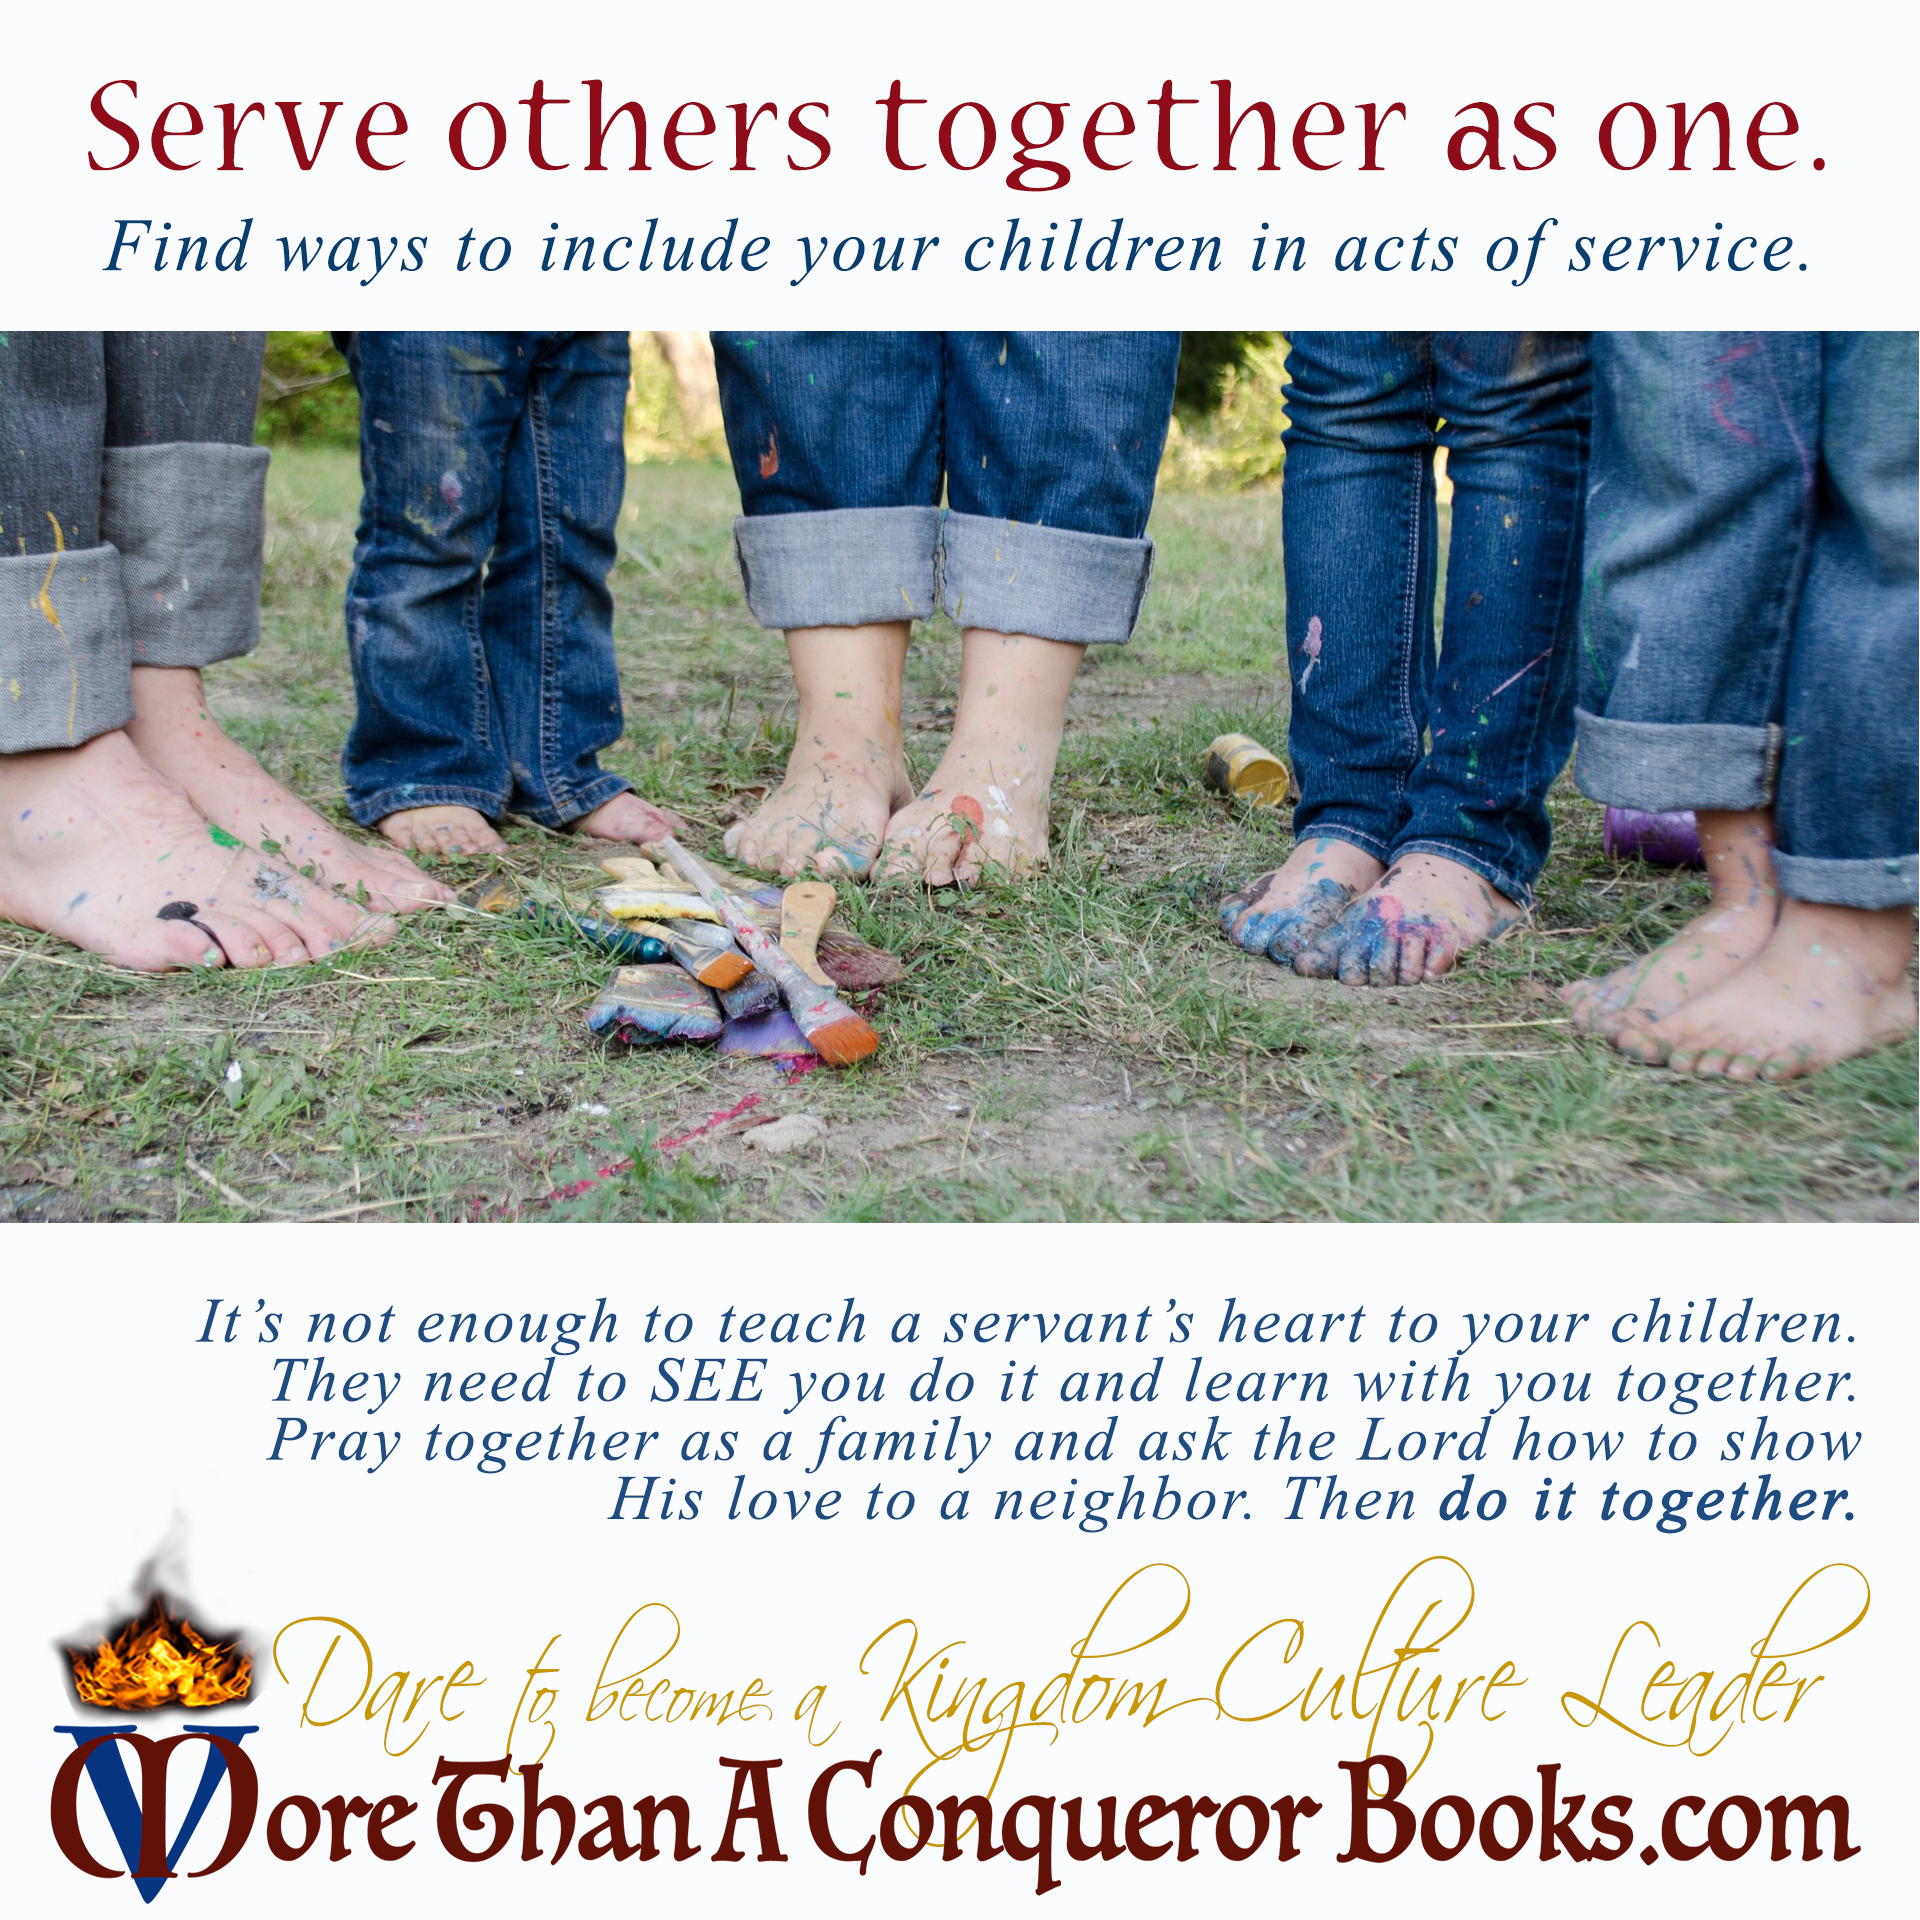 Serve others together as one-family-Dare to Become a Kingdom Culture Leader-Mikaela Vincent-MoreThanAConquerorBooks.jpg